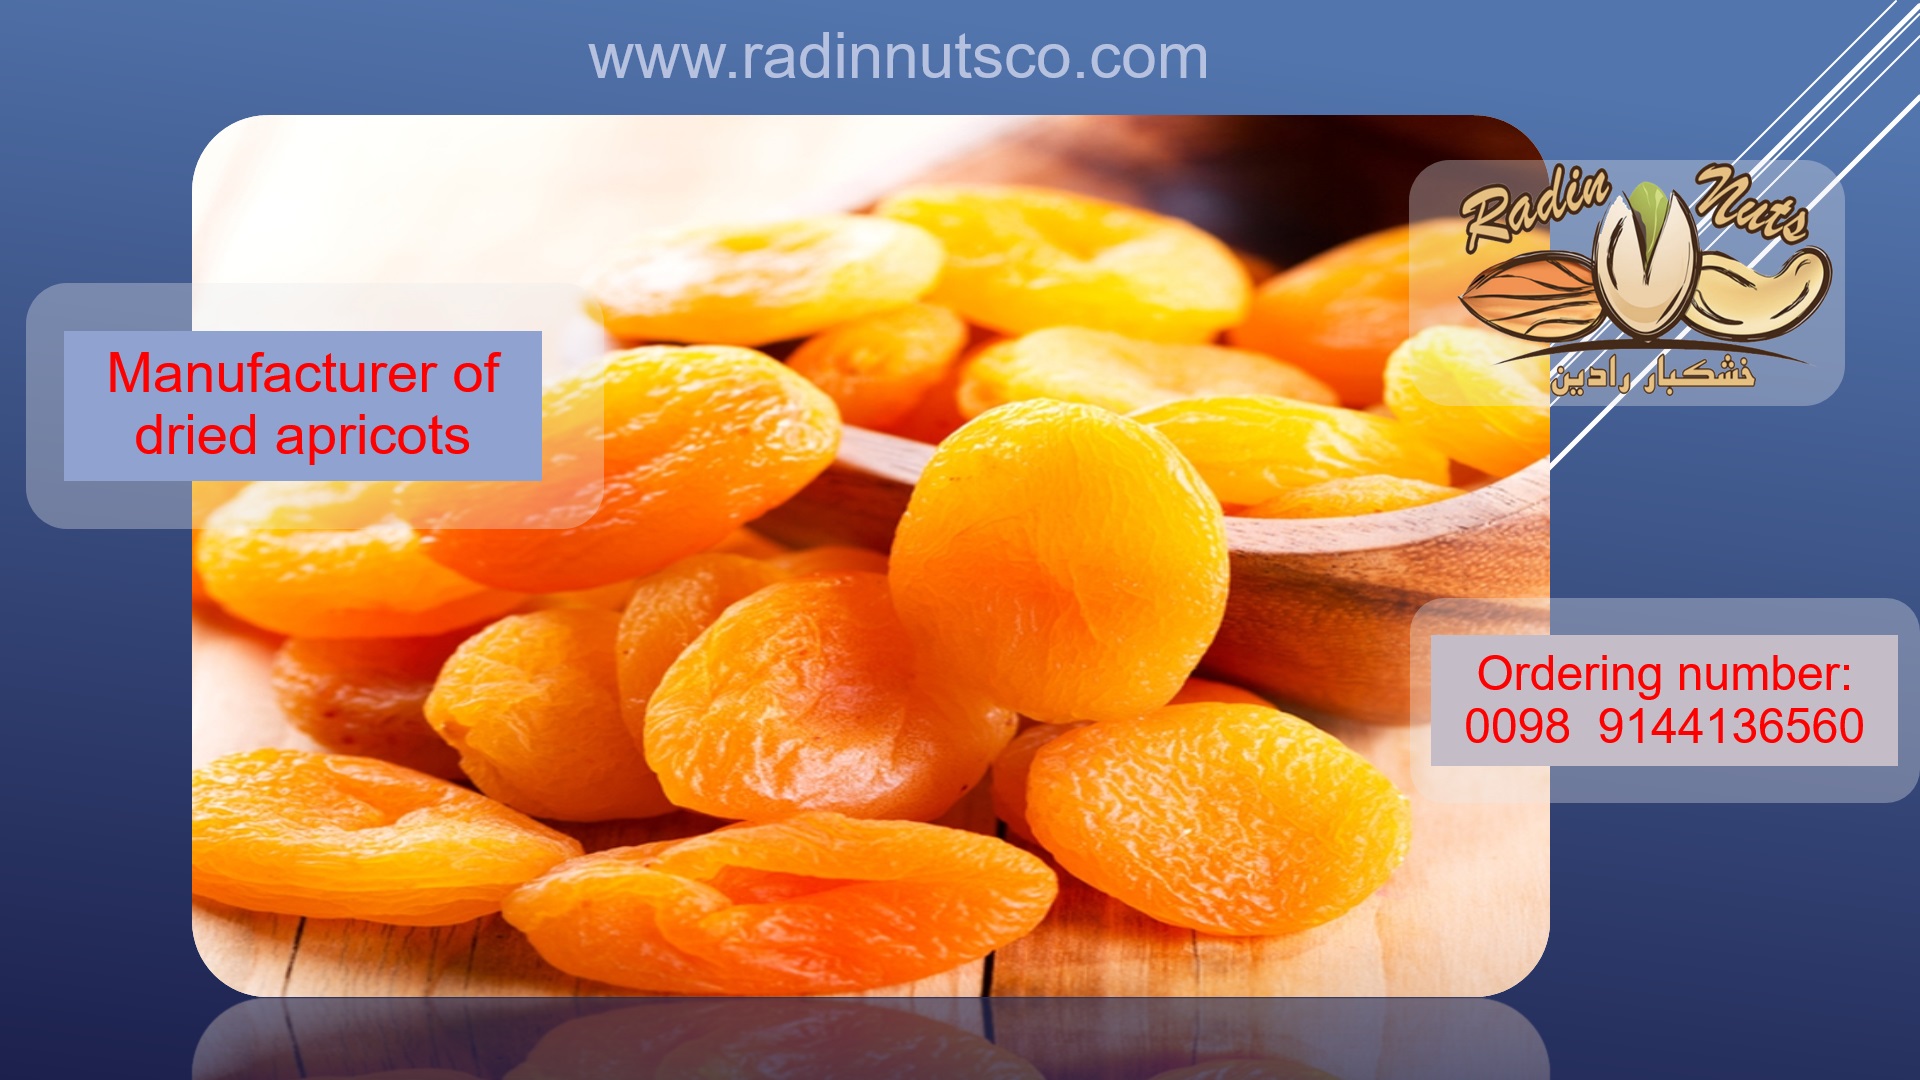 Producer of dried apricots in the world